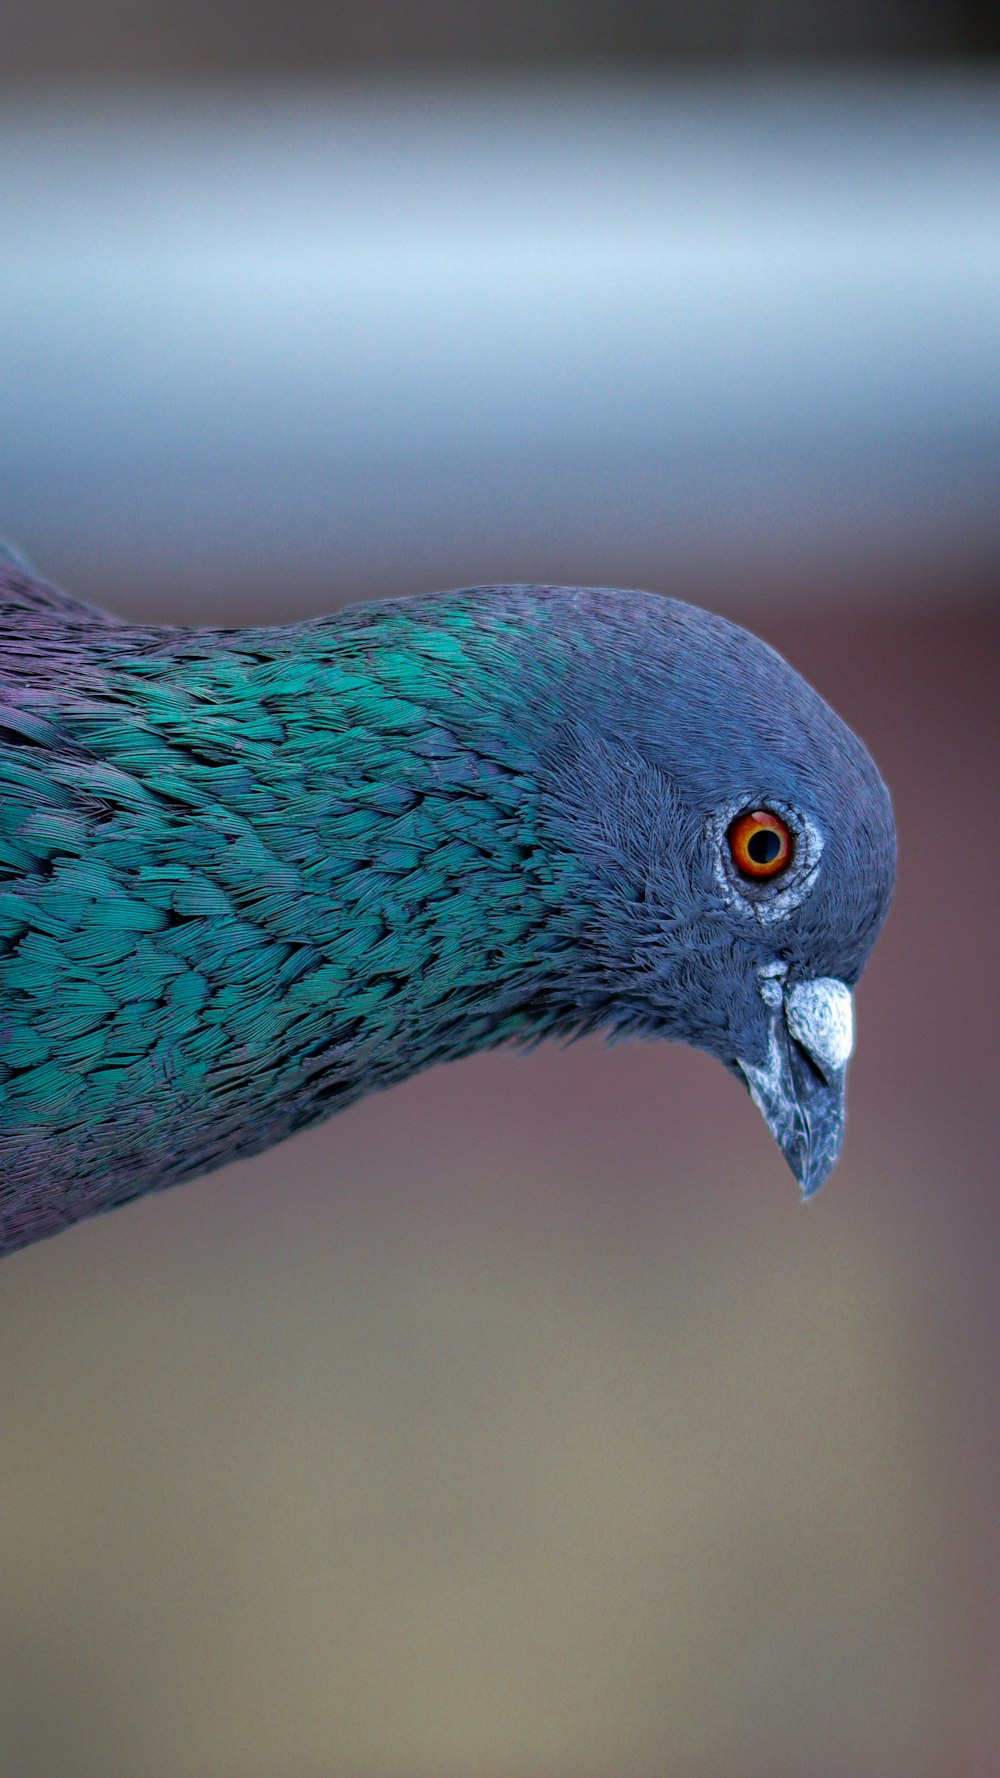 blue and gray bird in close up photography